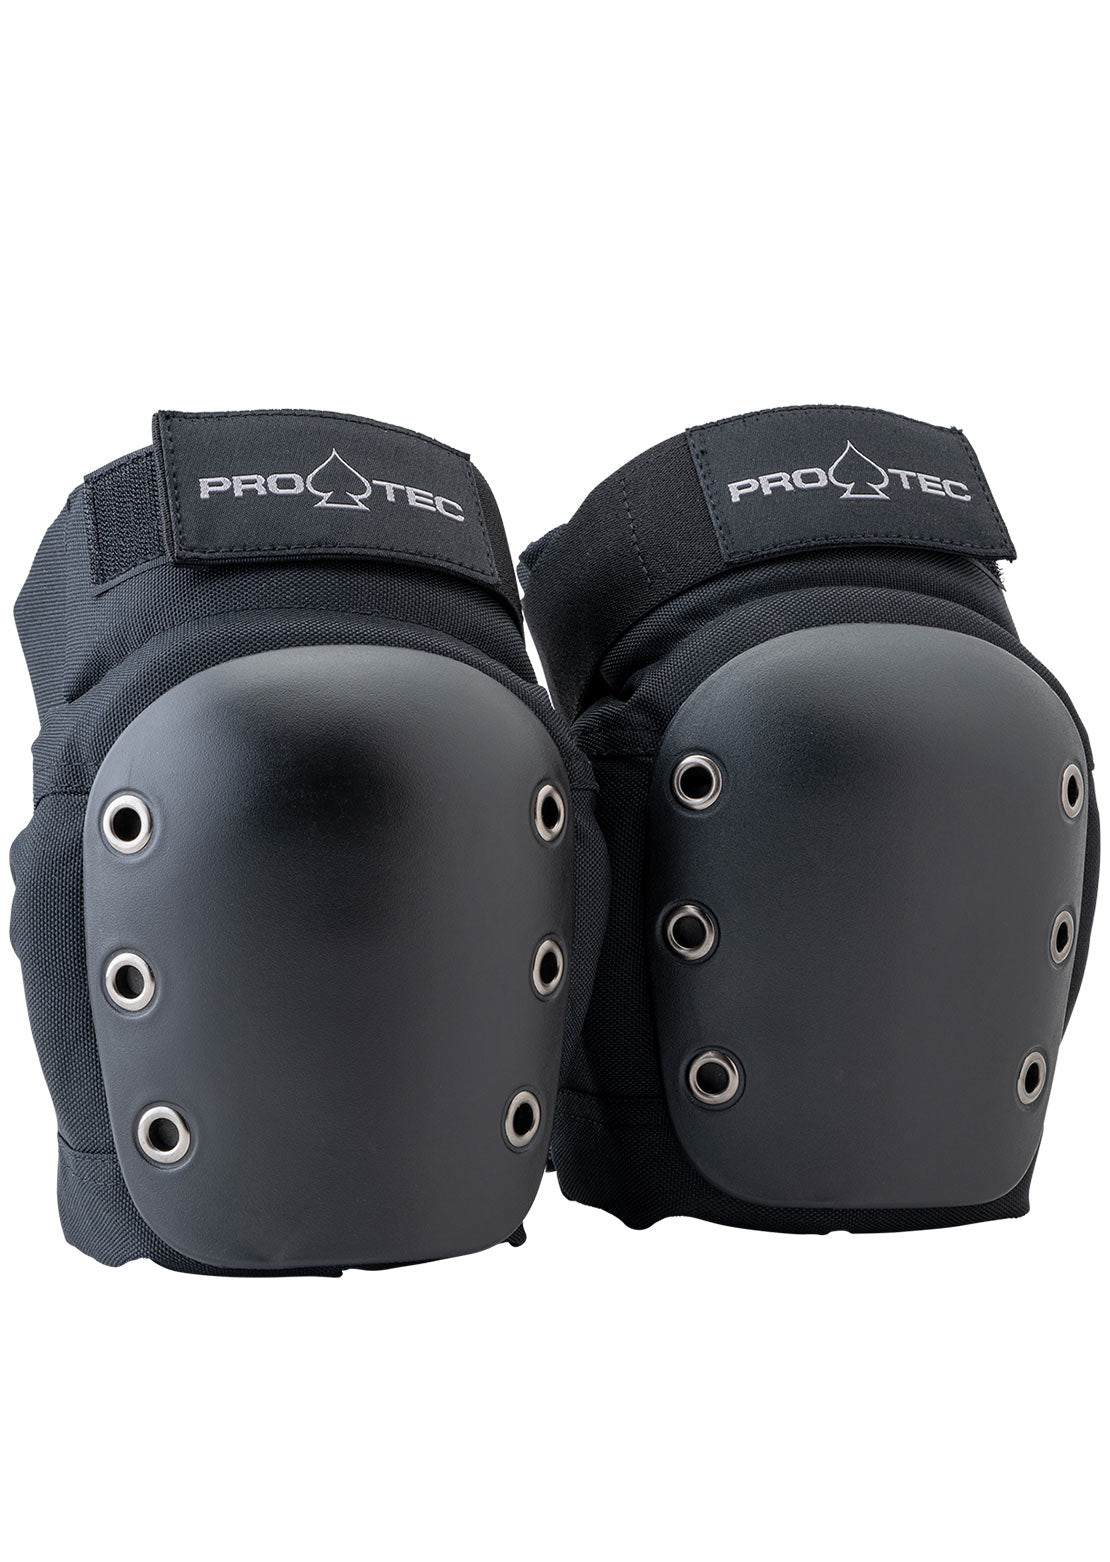 Pro-Tec Junior Street Gear 3 Pack Pads Protection Black